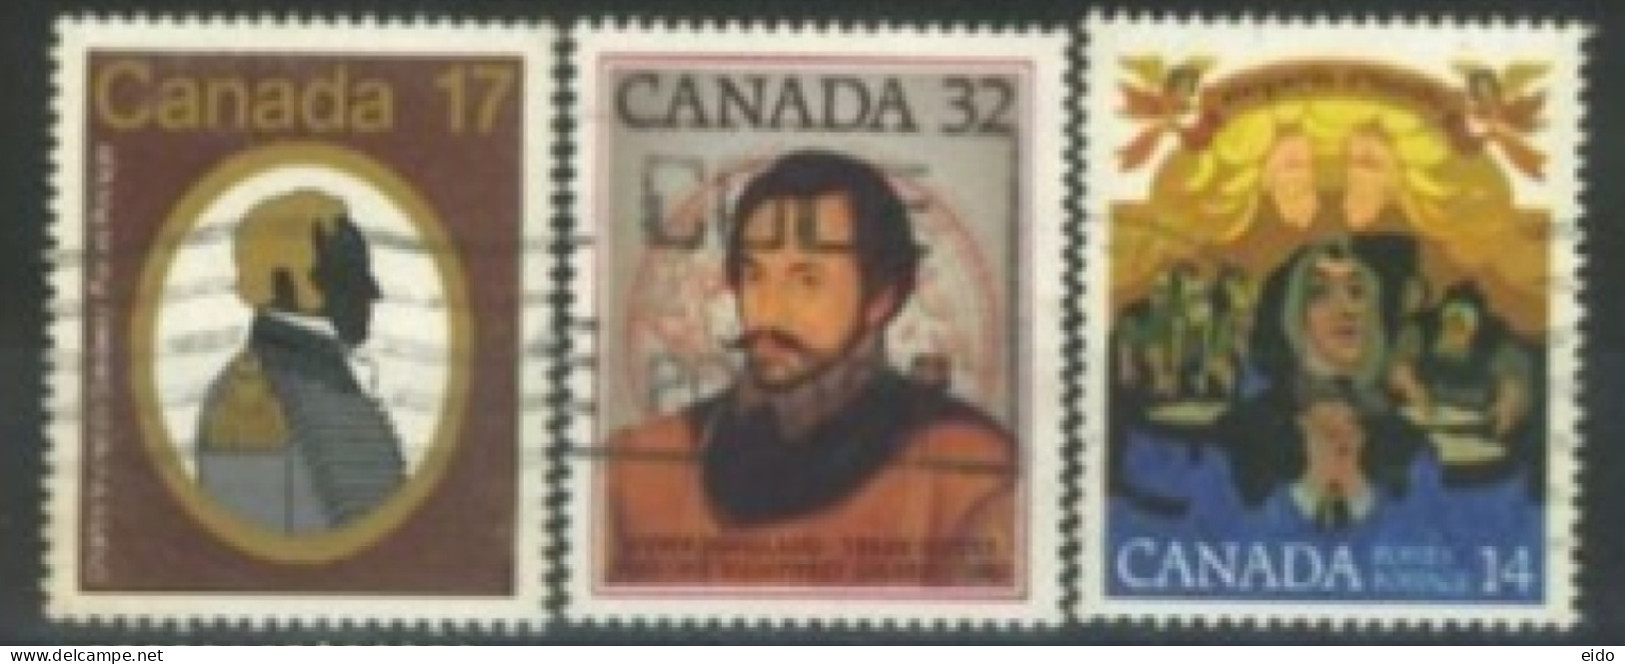 CANADA - 1978/83, MARGUERITE D'YOUVILLE COMMEMORATION, CHARLES MICHEL & SIR HUMPHREY. STAMPS SET OF 3, USED. - Usados